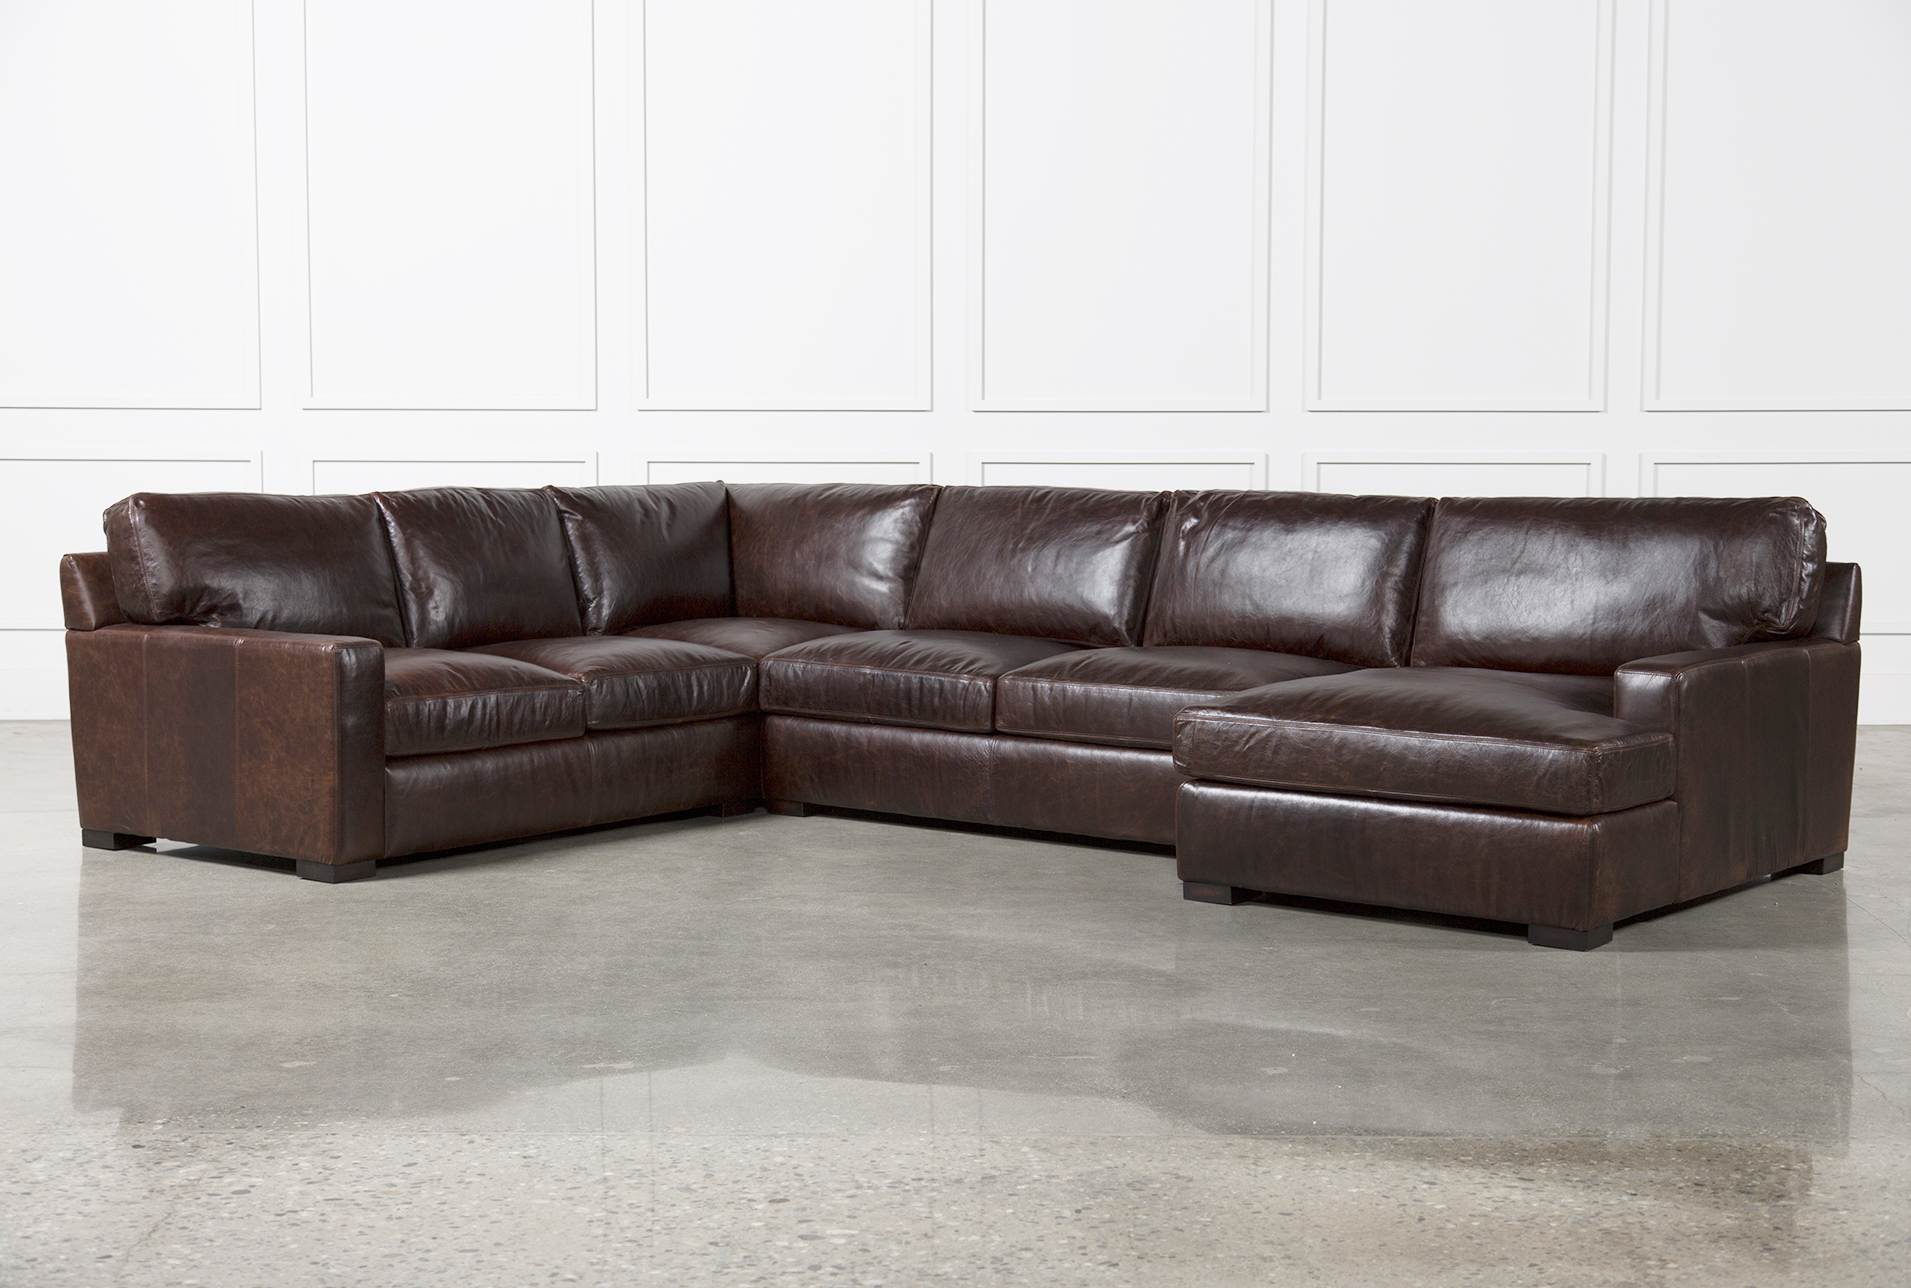 2 piece leather sectional sofa